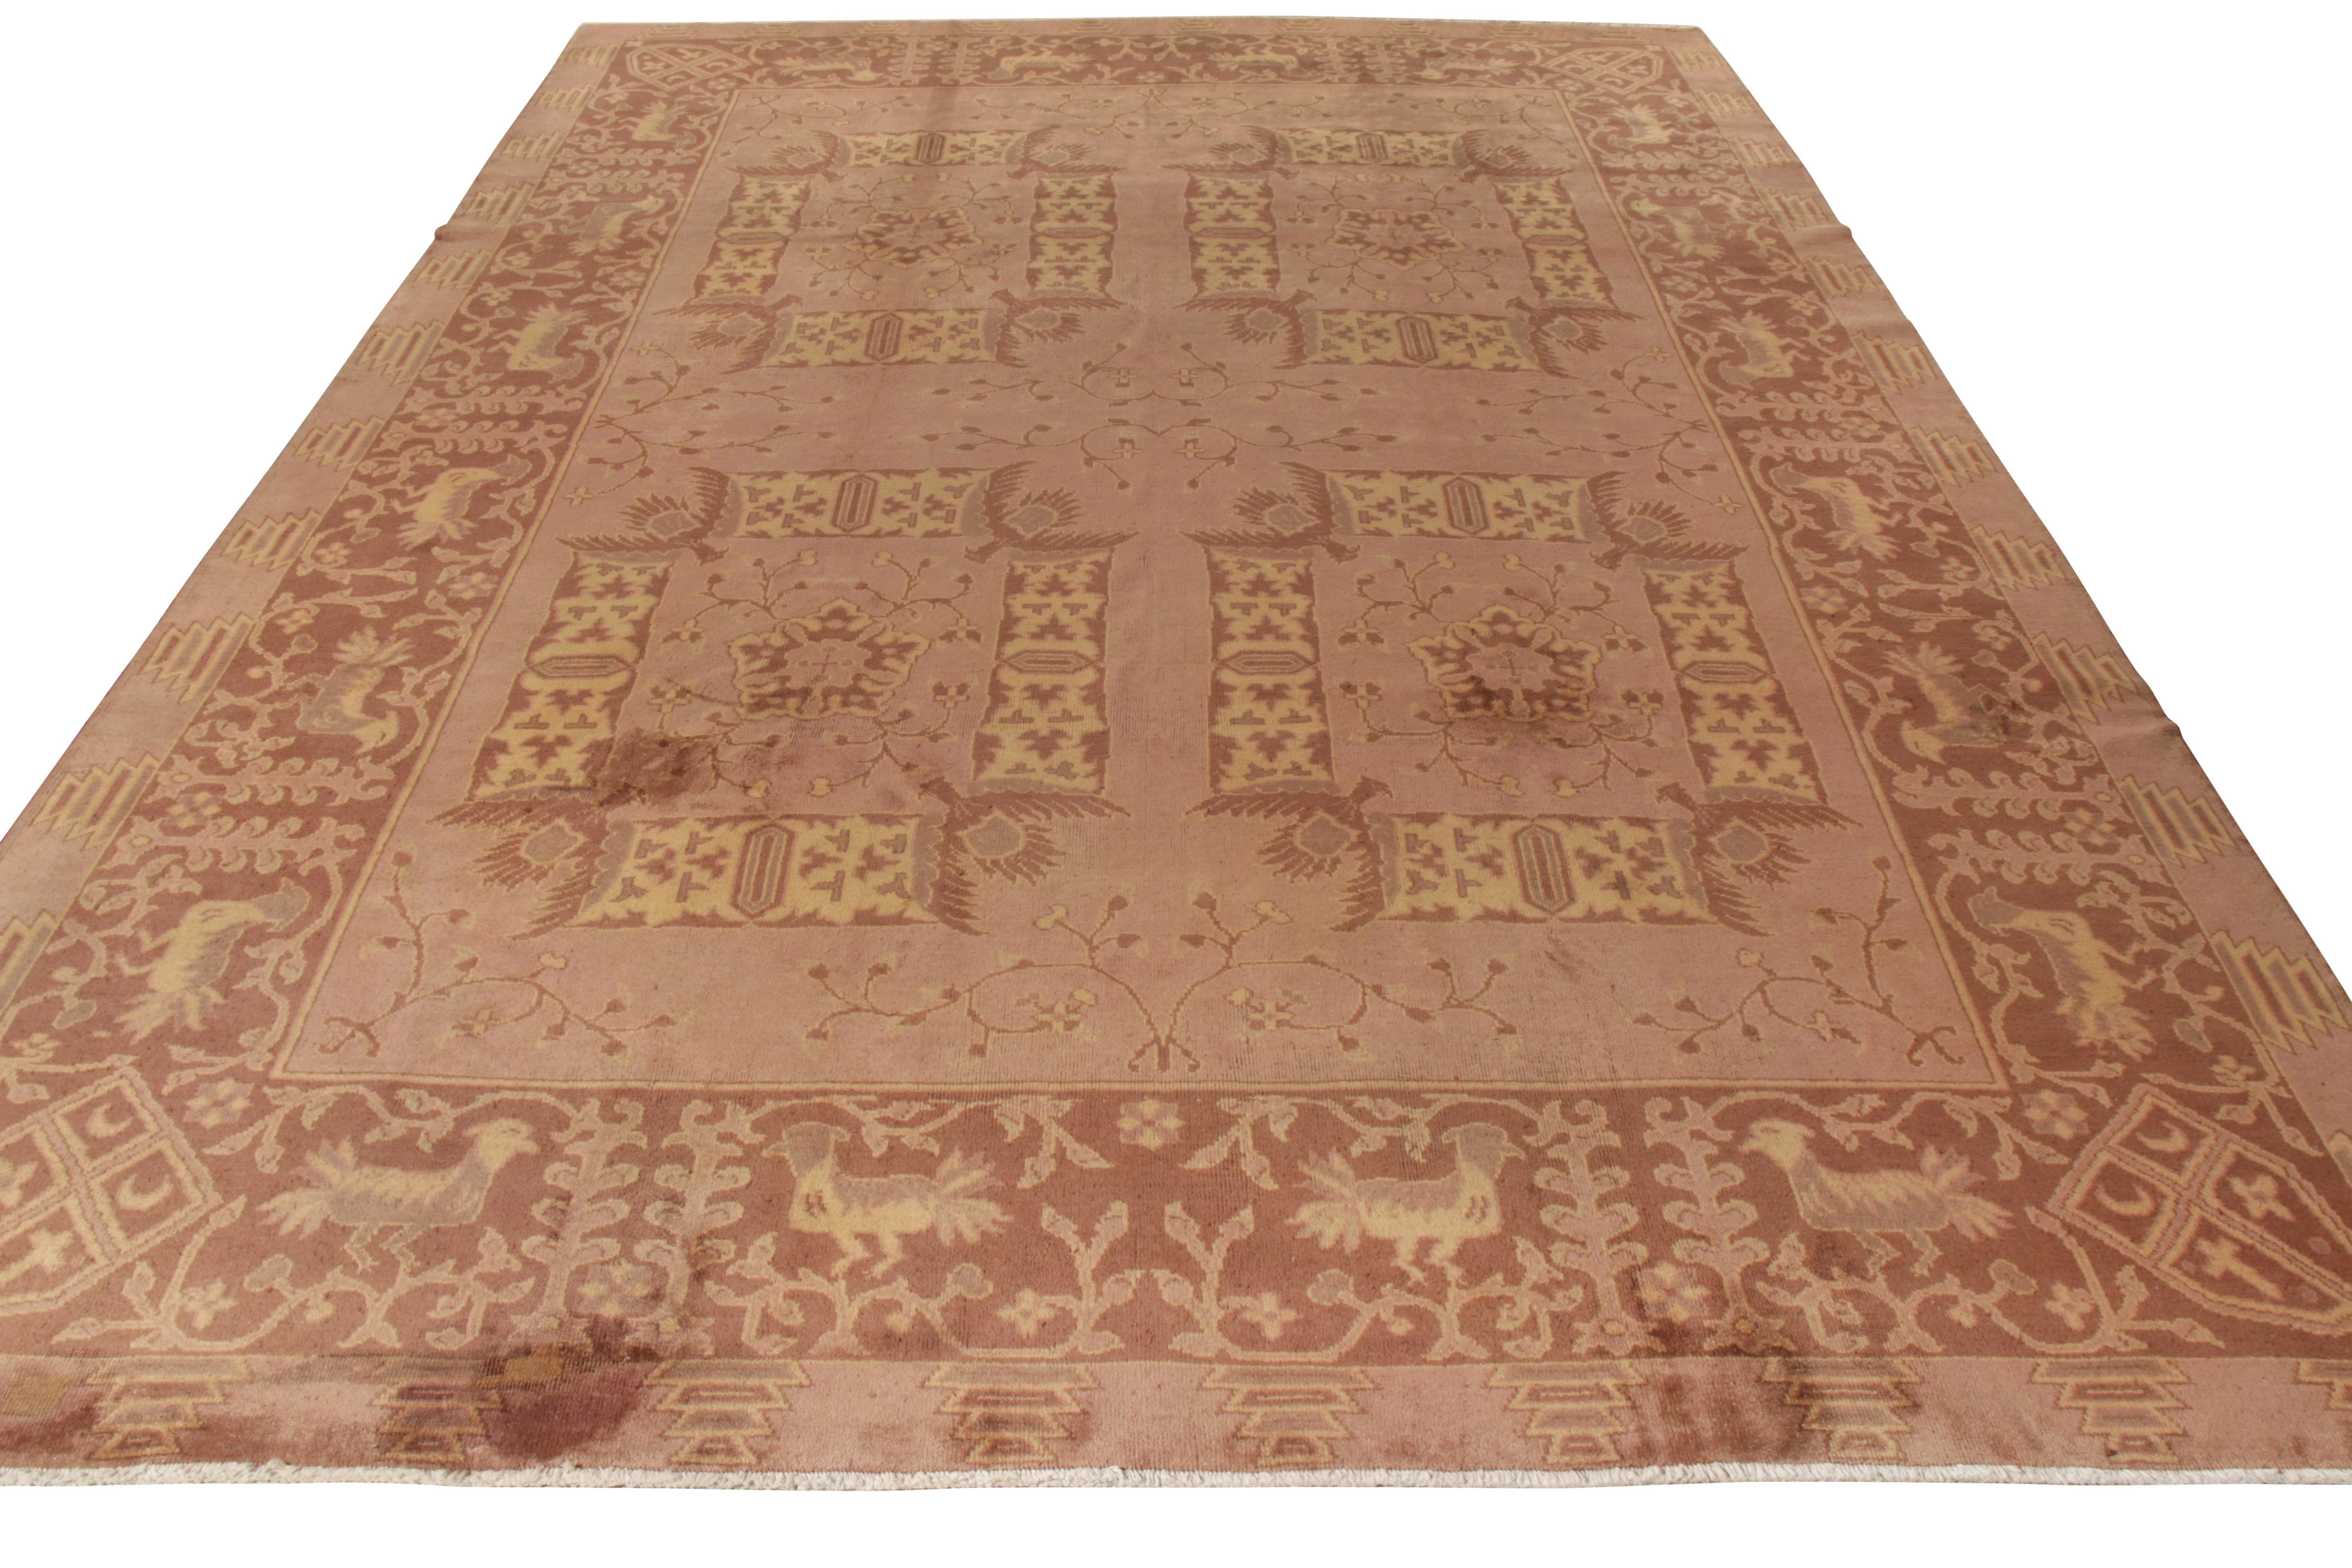 Hand knotted in wool, an antique Indian rug circa 1900-1910 joining Rug & Kilim’s Antique & Vintage collection. This 9x13 Indochinese Samarkand rug witnesses an enticing play of inspiration as it enjoys a variety of intriguing cultural influences in